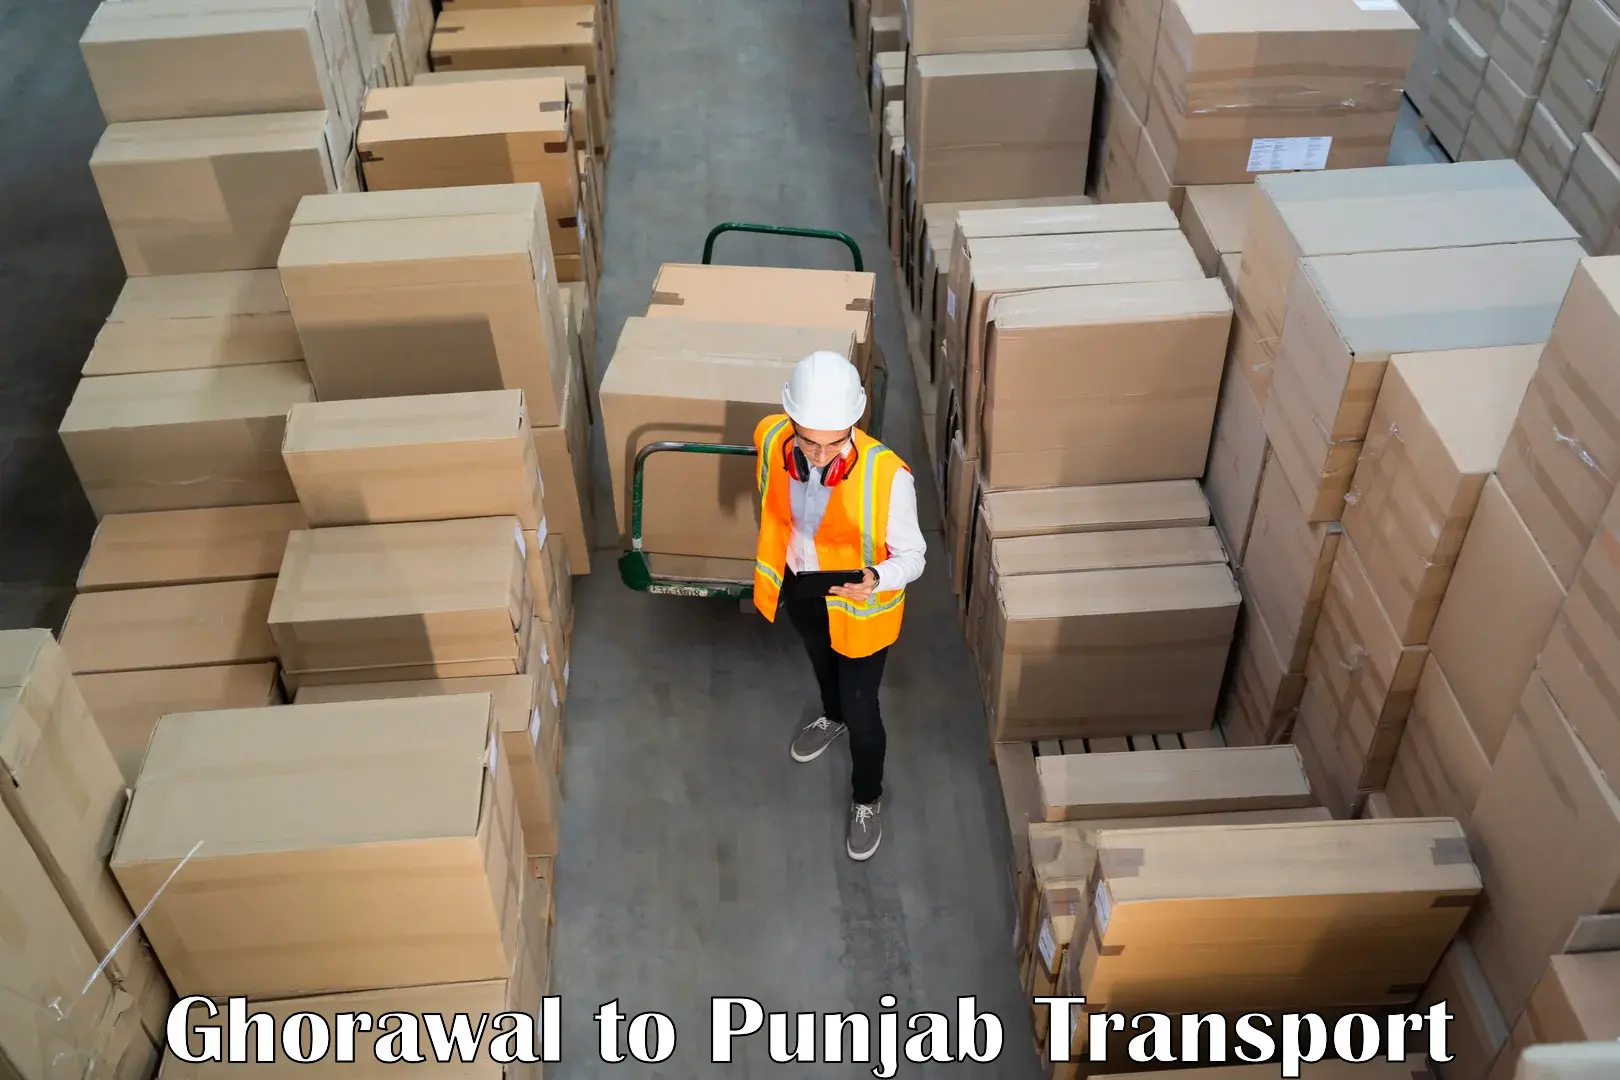 Cargo transportation services in Ghorawal to Fatehgarh Sahib